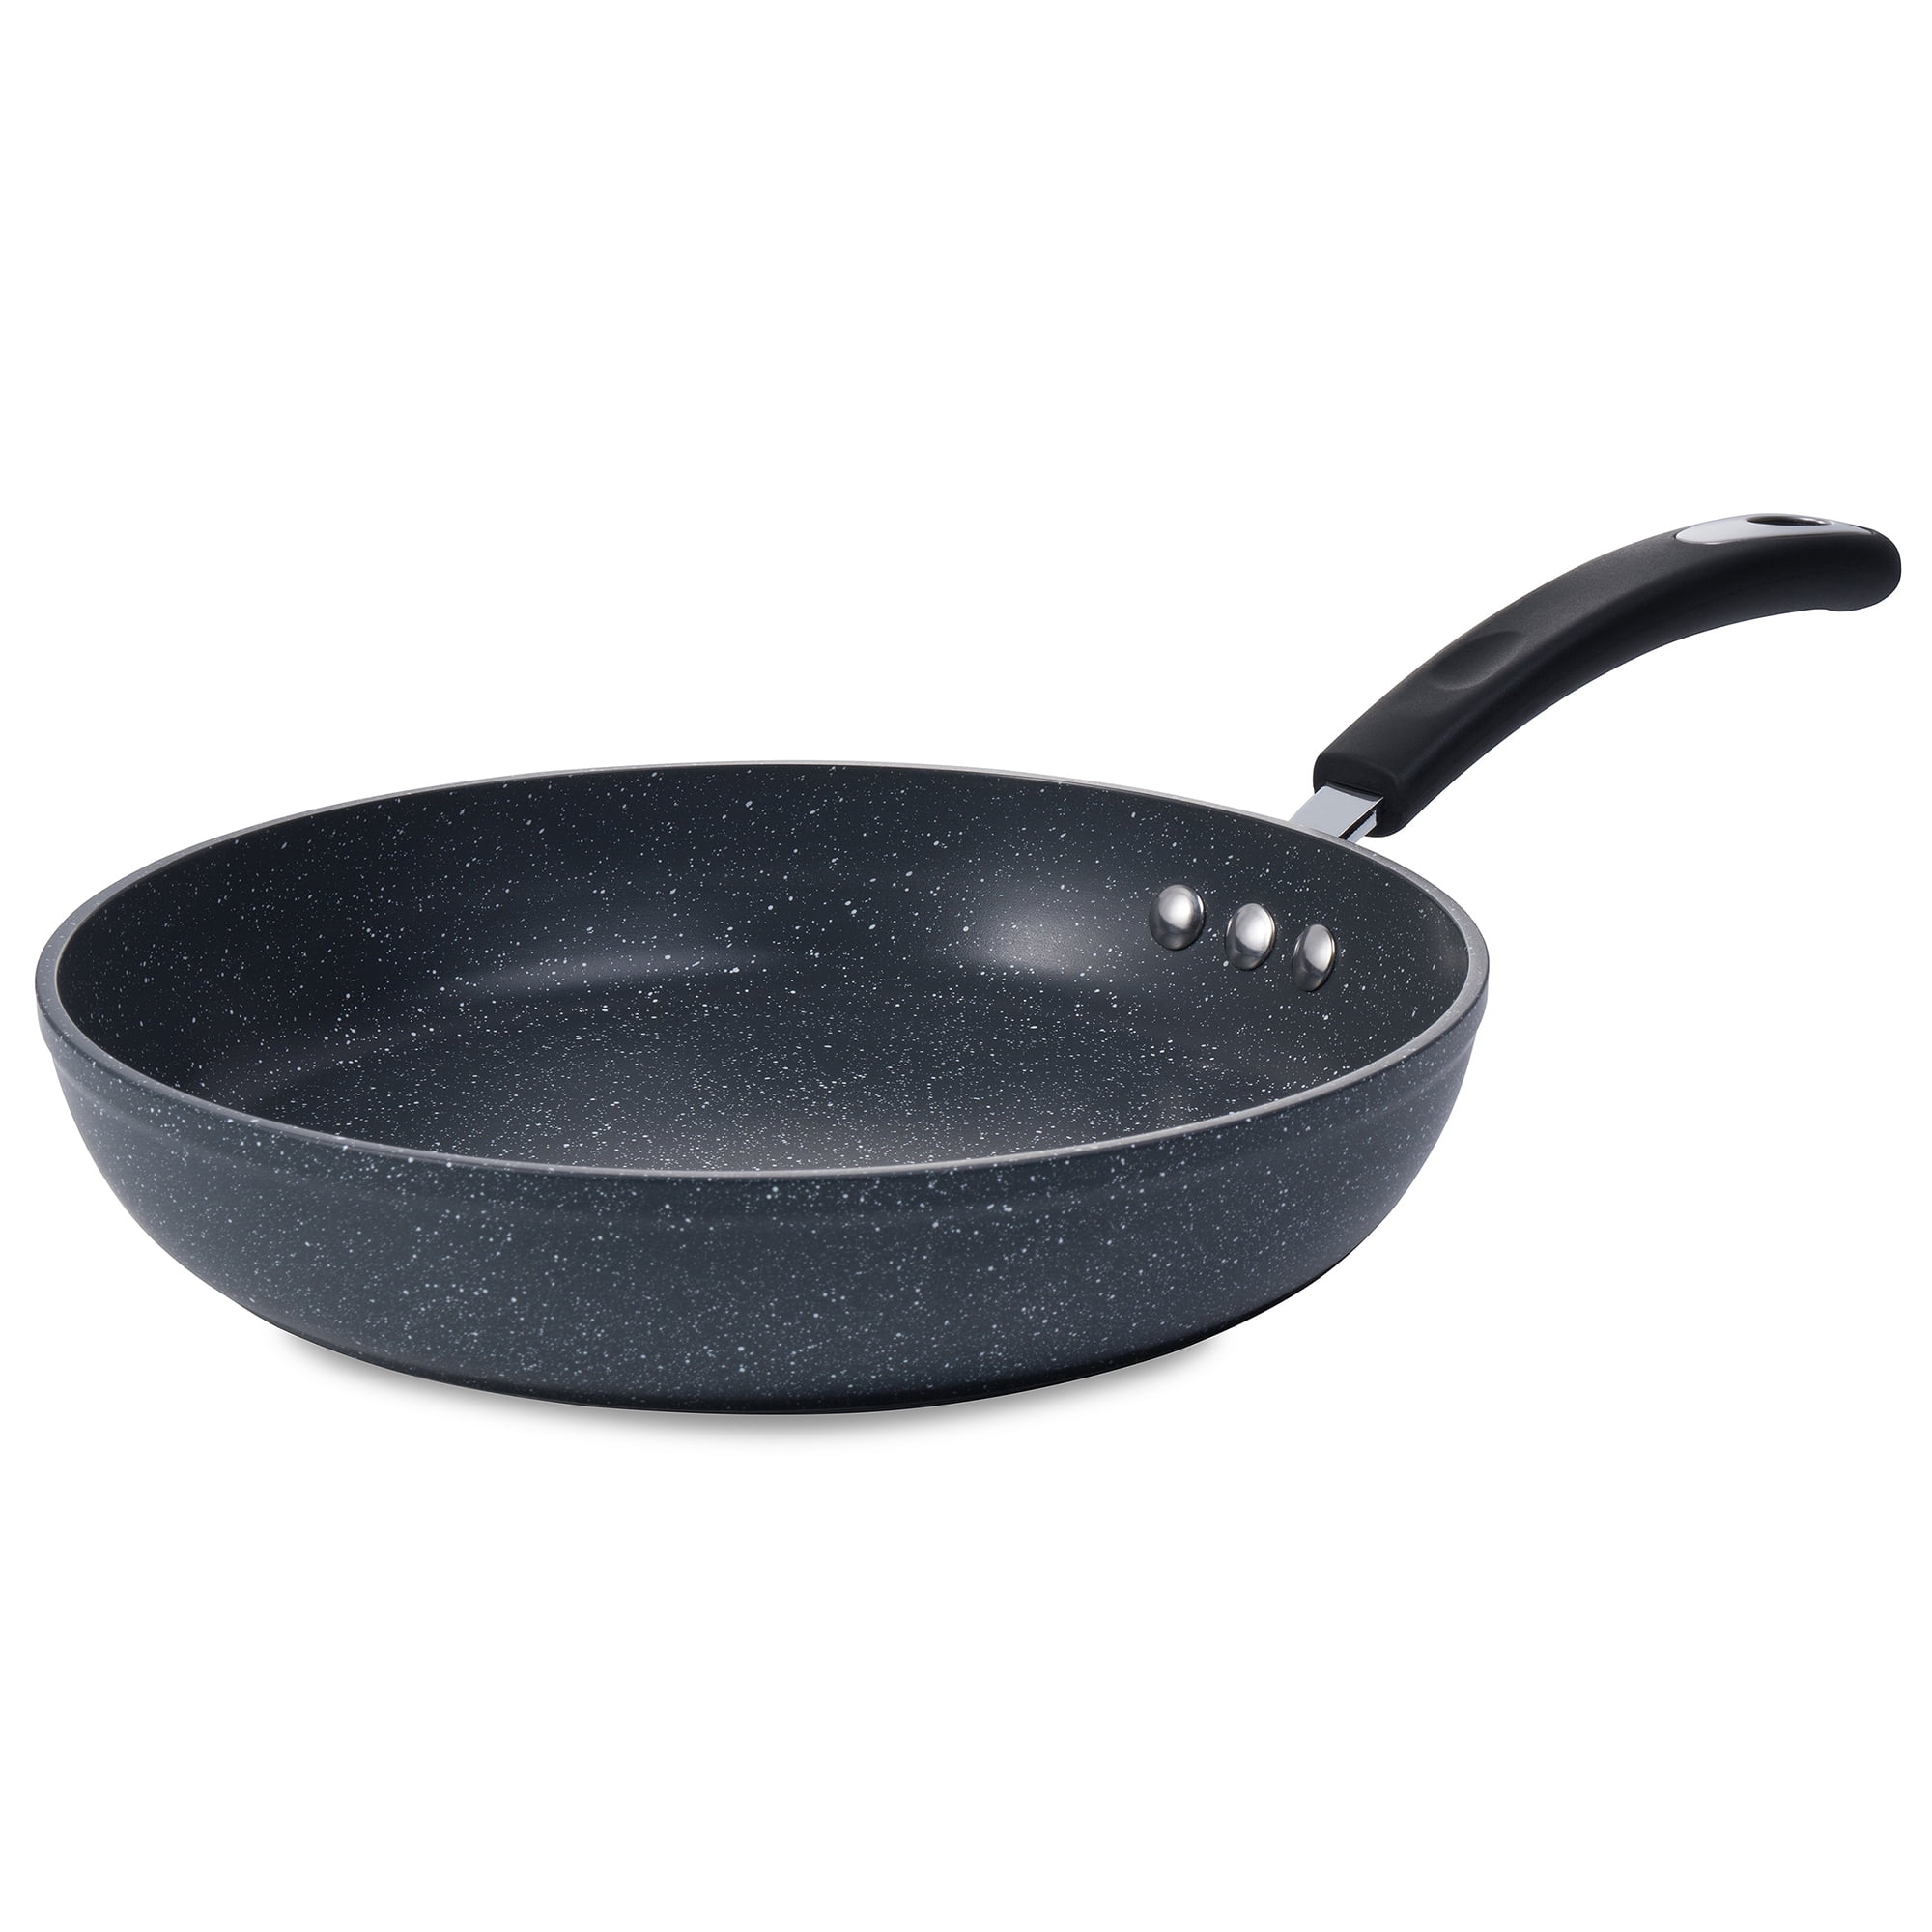 8 Stone Frying Pan by Ozeri, with 100% APEO & PFOA-Free Stone-Derived  Non-Stick Coating from Germany 